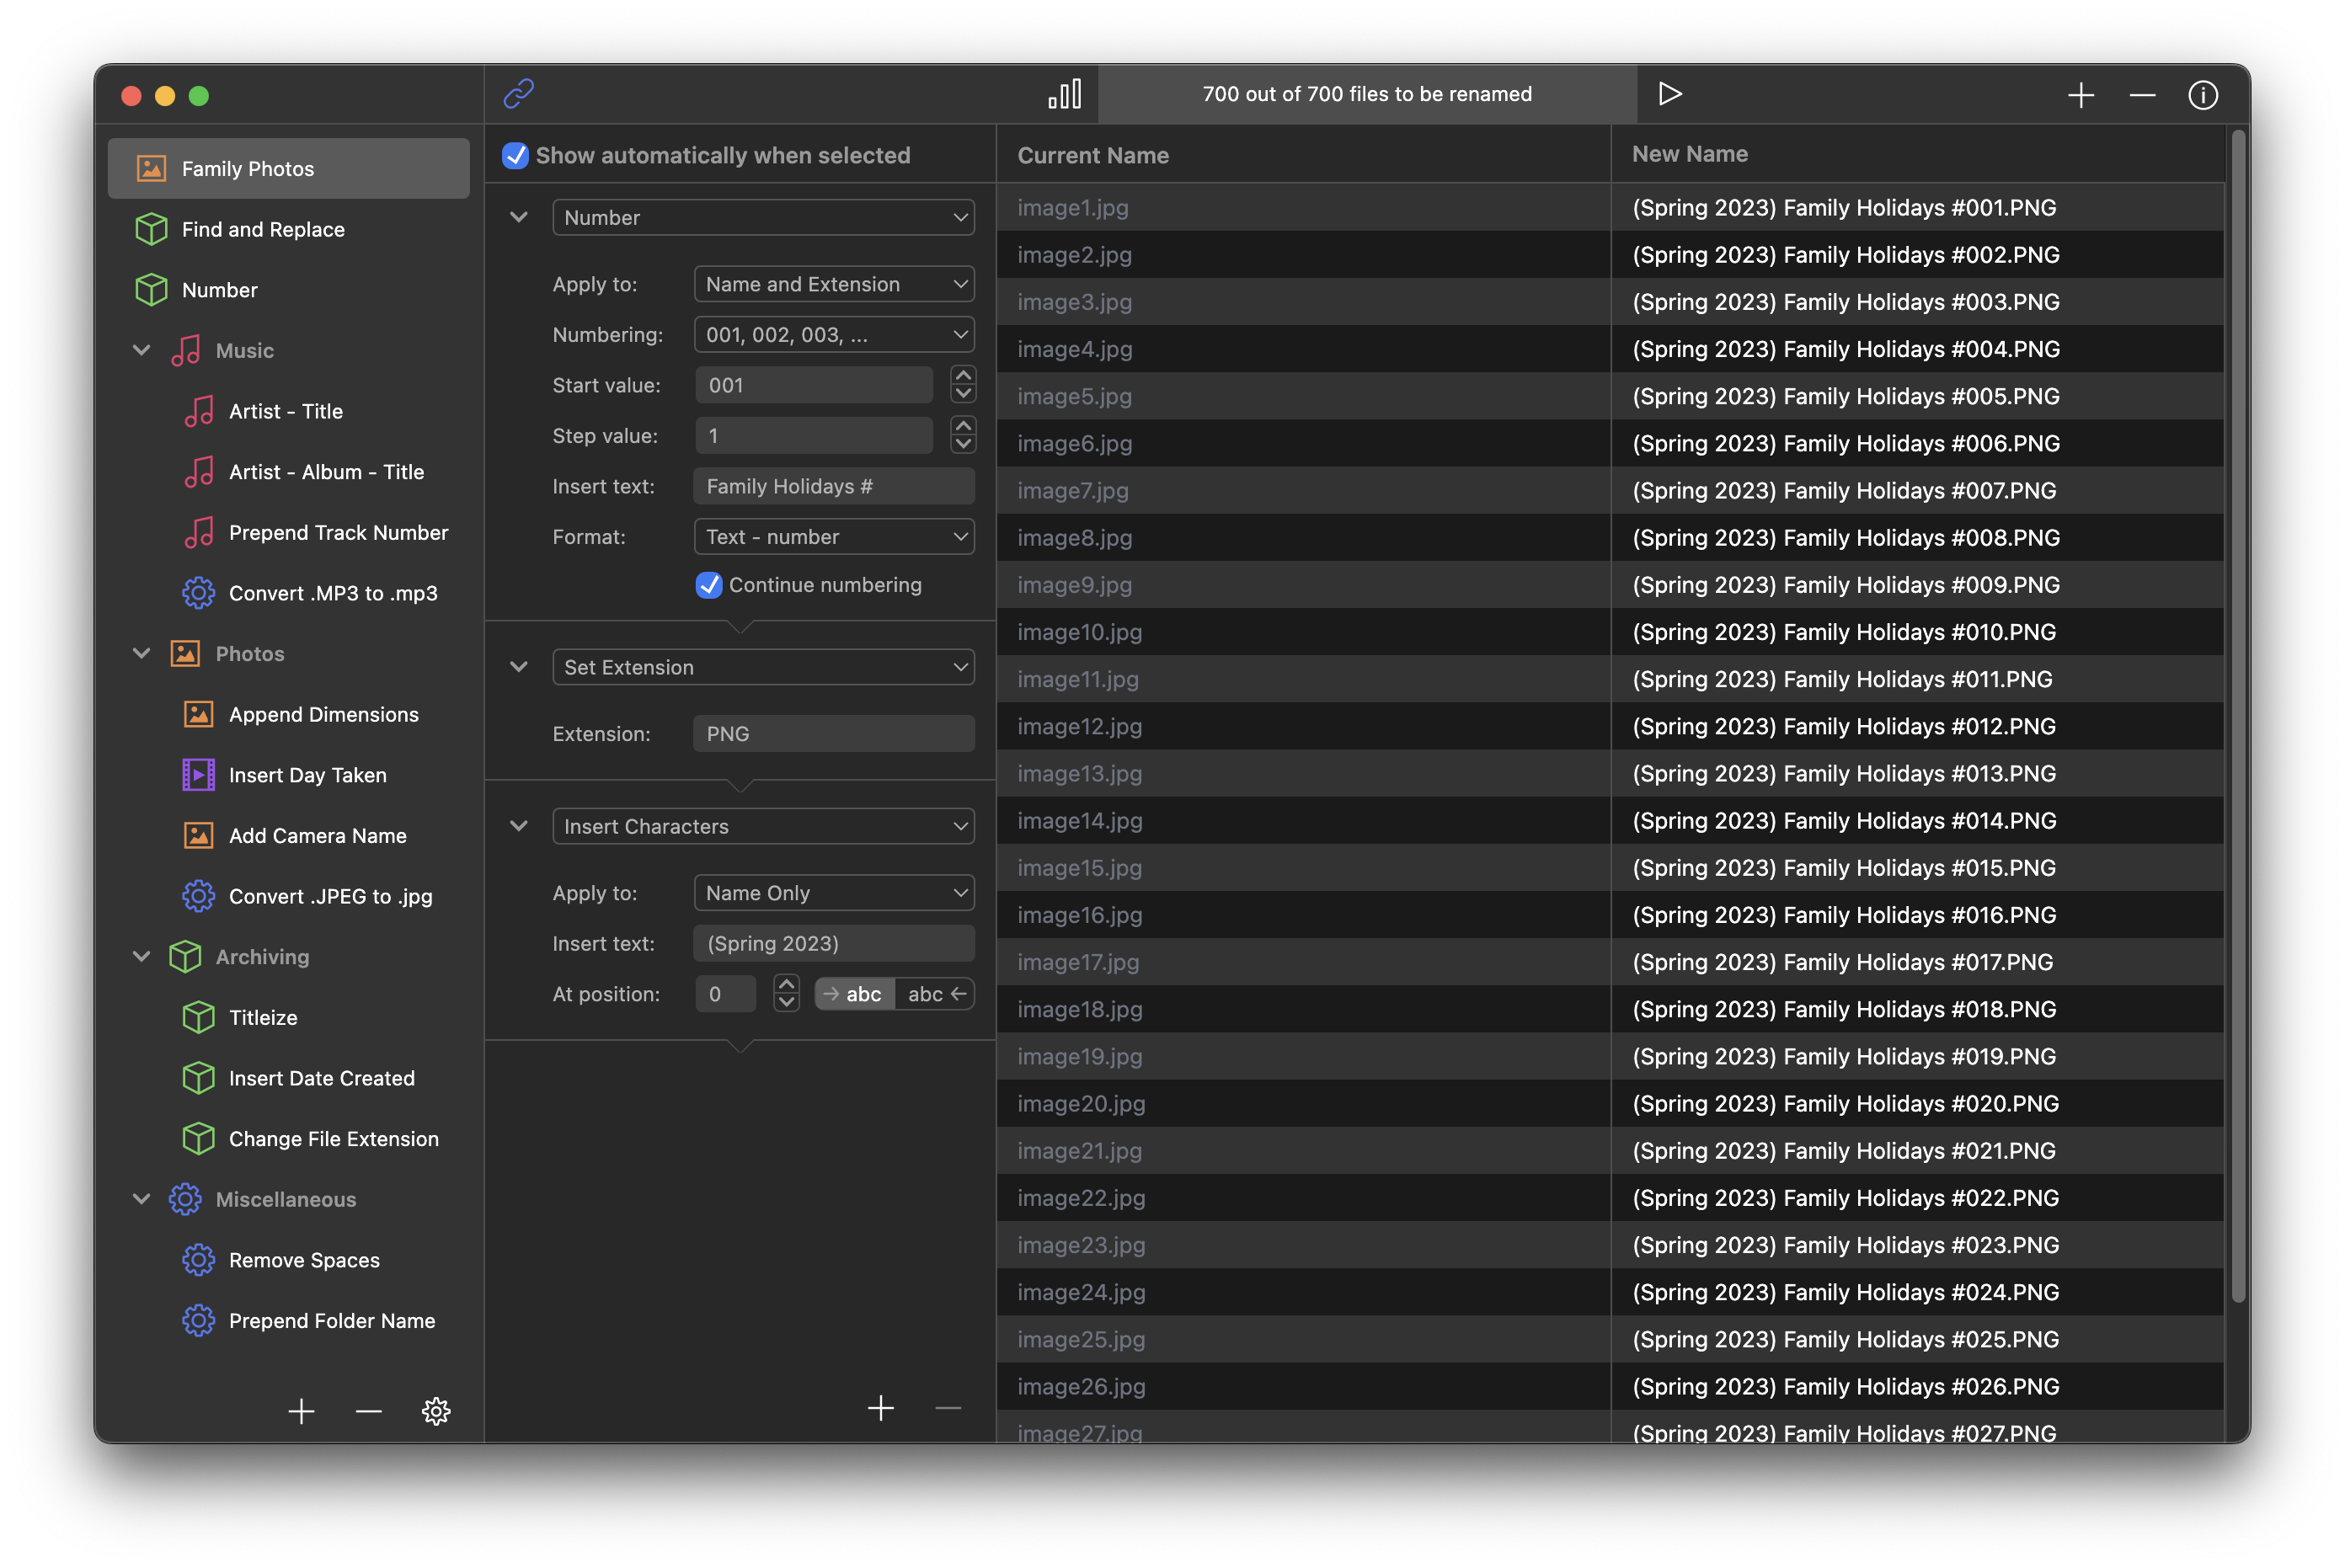 A sample image of how the Renamer workflow looks